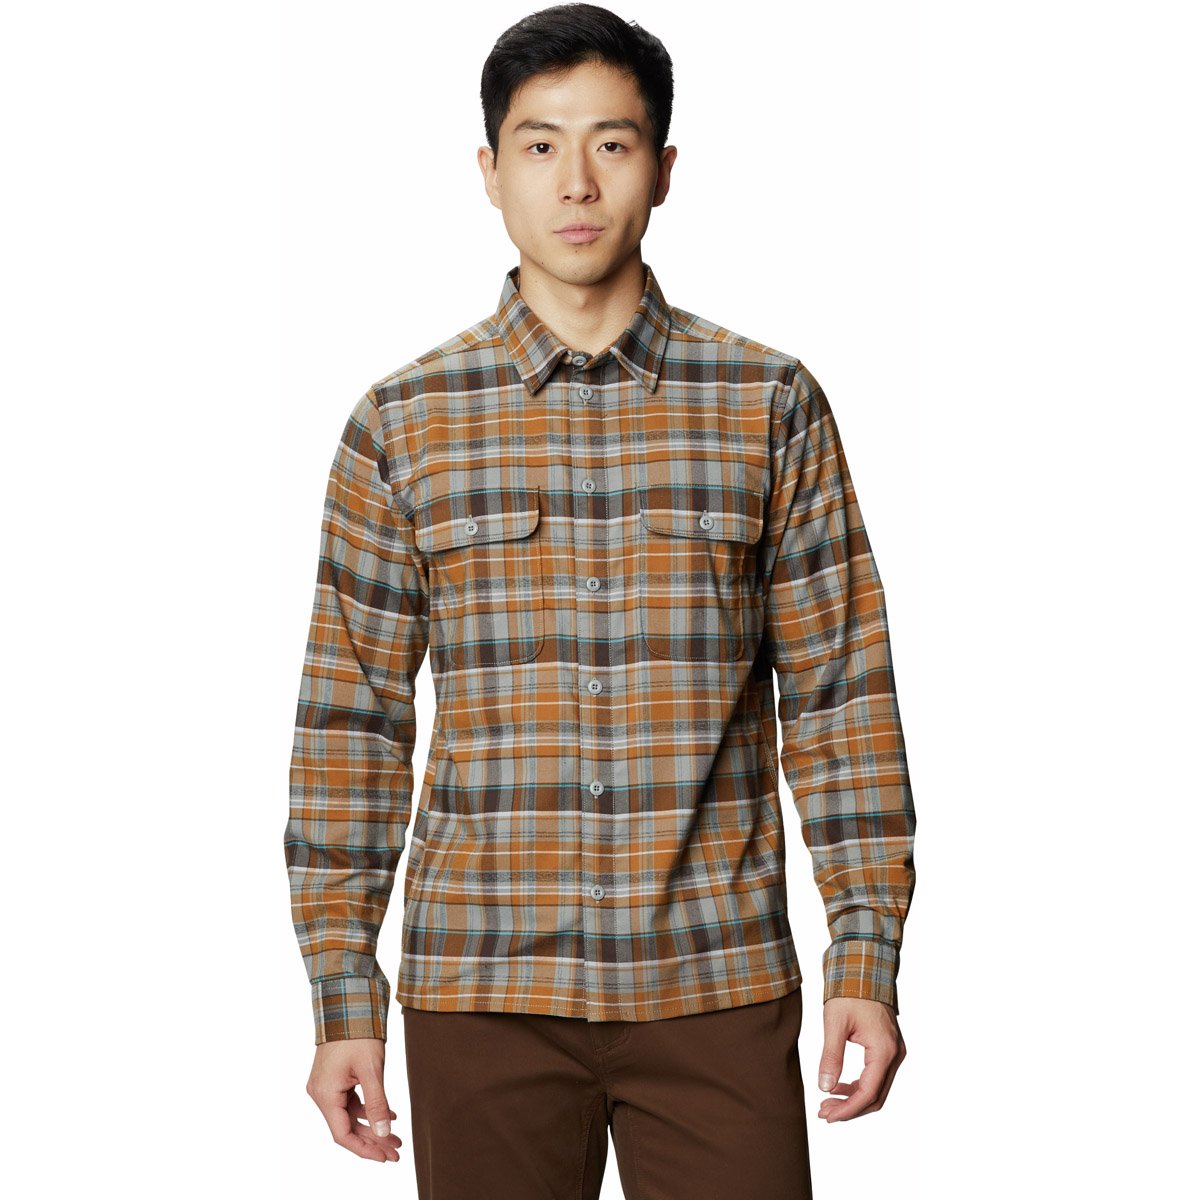 Men's Voyager One Long Sleeve Shirt